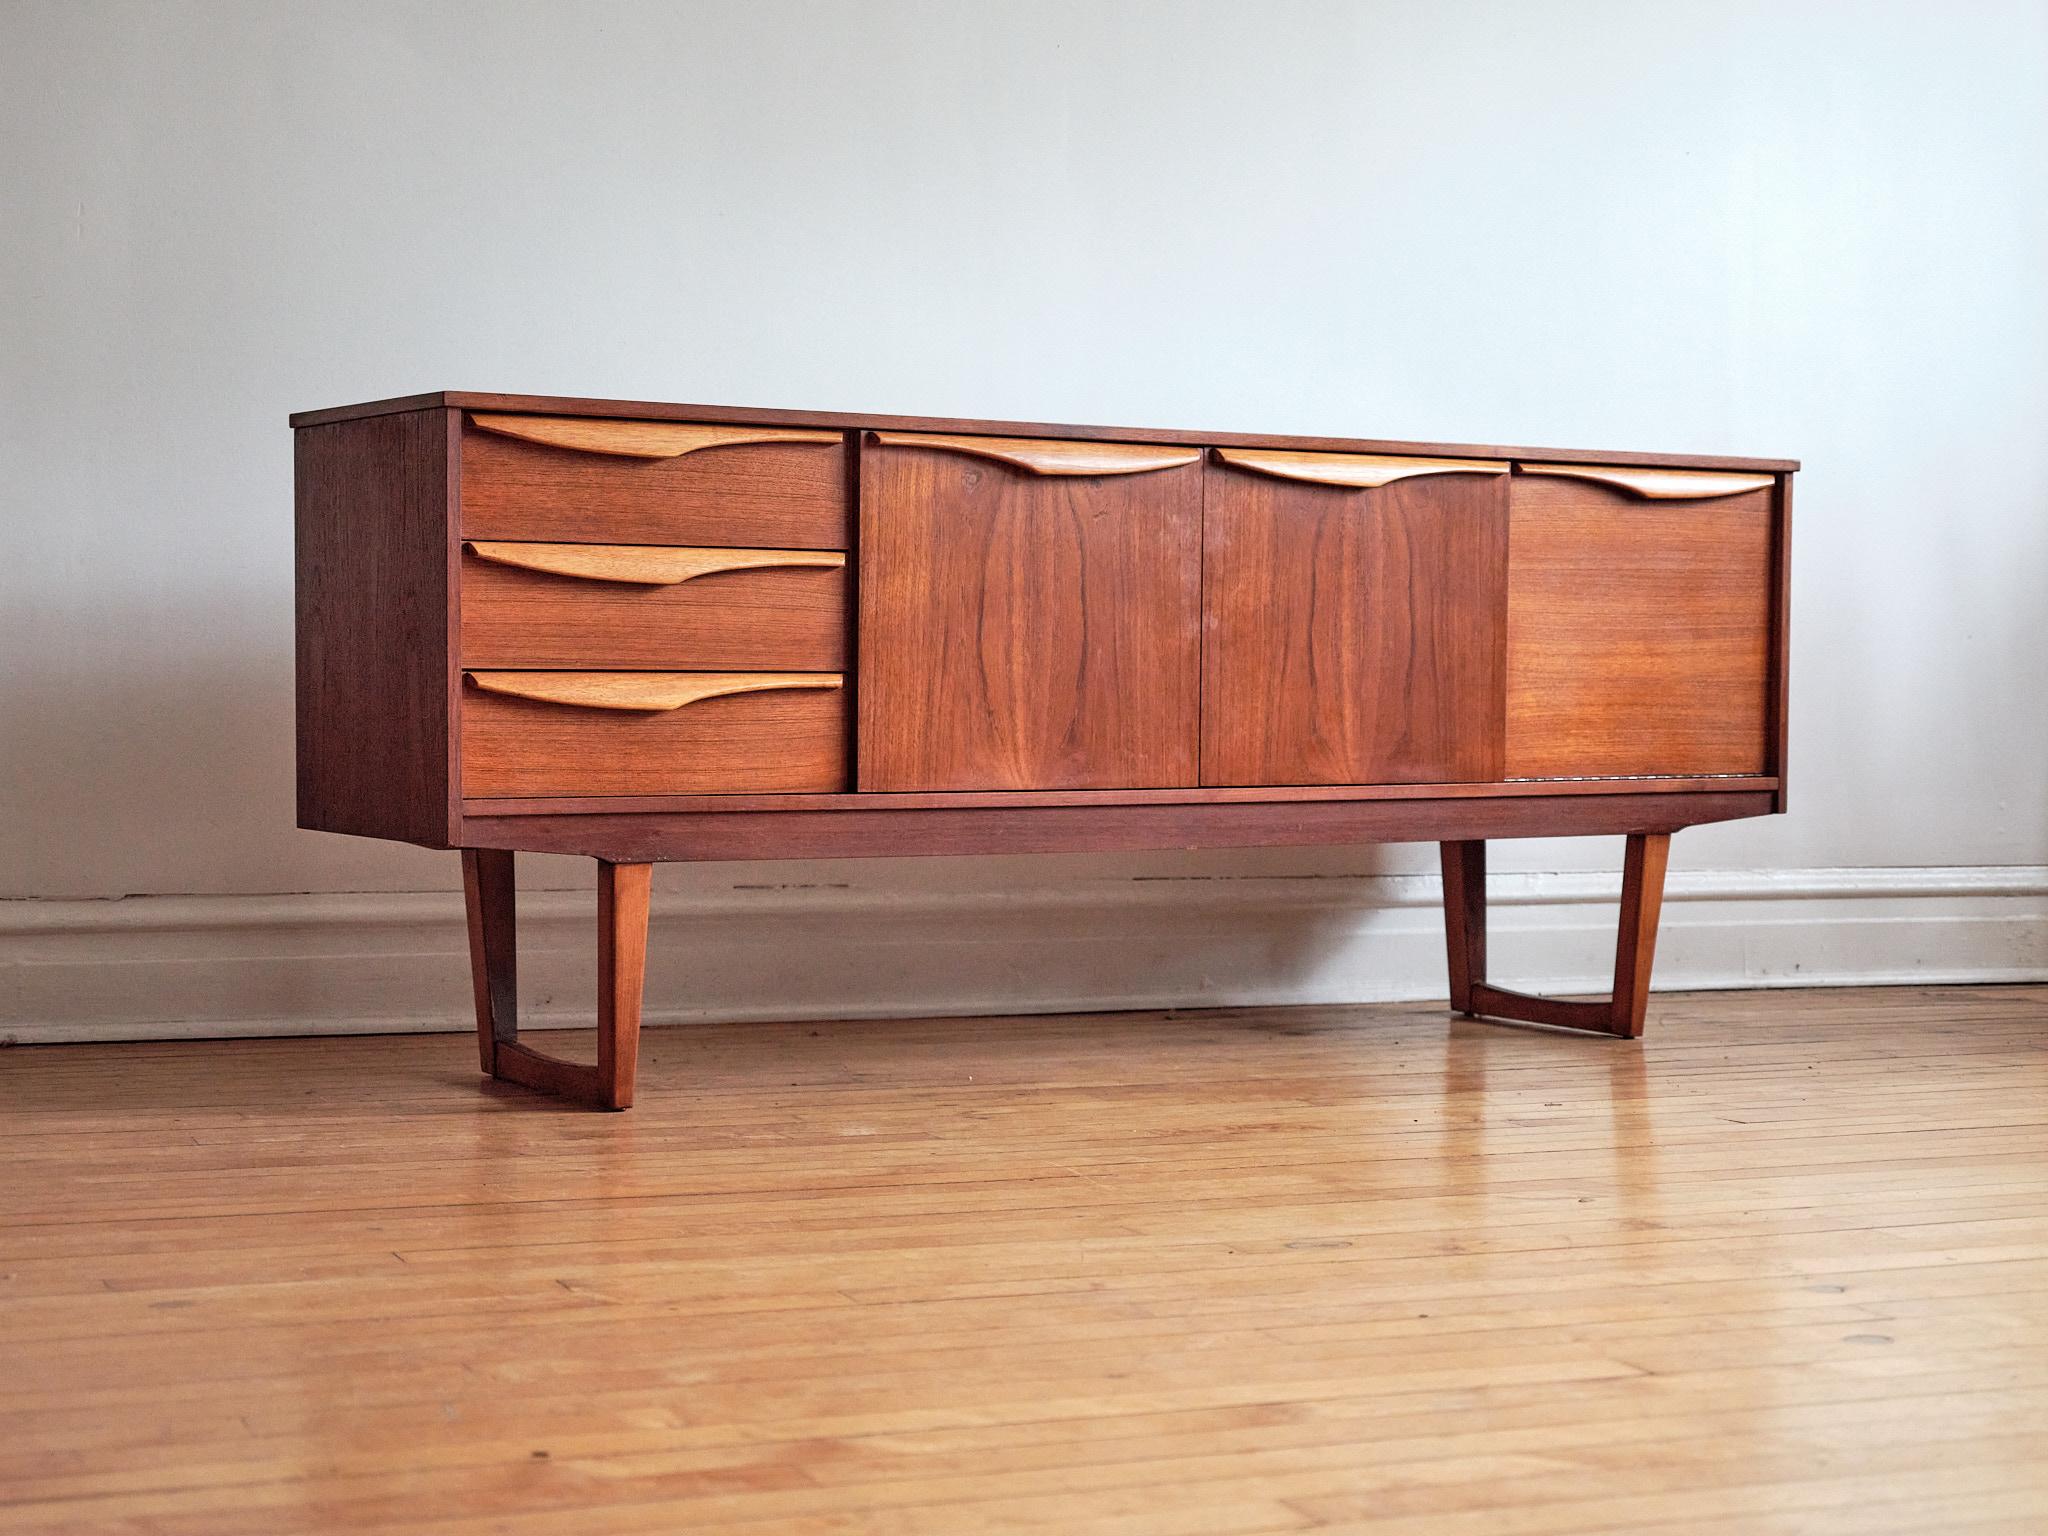 Mid-Century Modern teak wood sleigh leg credenza.
Just imported from England to Chicago.
Made by Stonehill Furniture.
Stunning book-matched woodgrain across the front.
Refinished light wood handles.
Center features double cabinet doors.
One